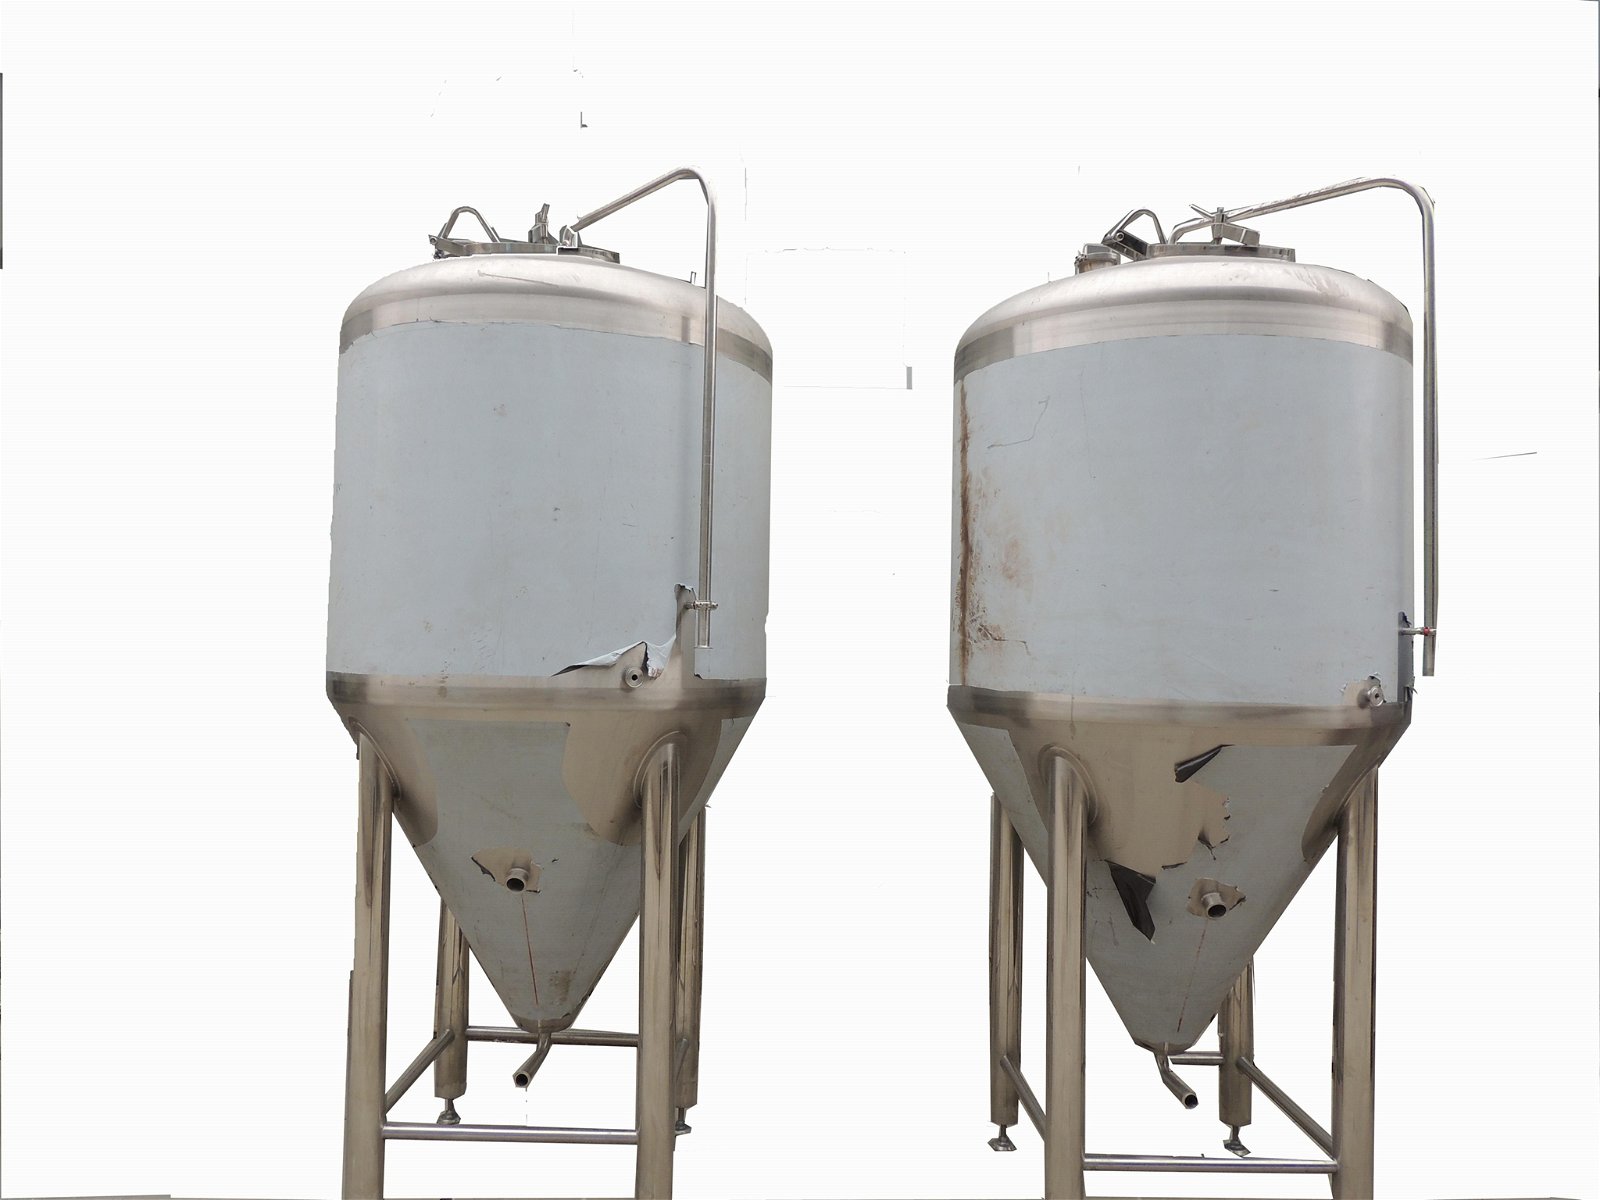 Hot sell 500L stainless steel beer brewing equipment for micro brewery